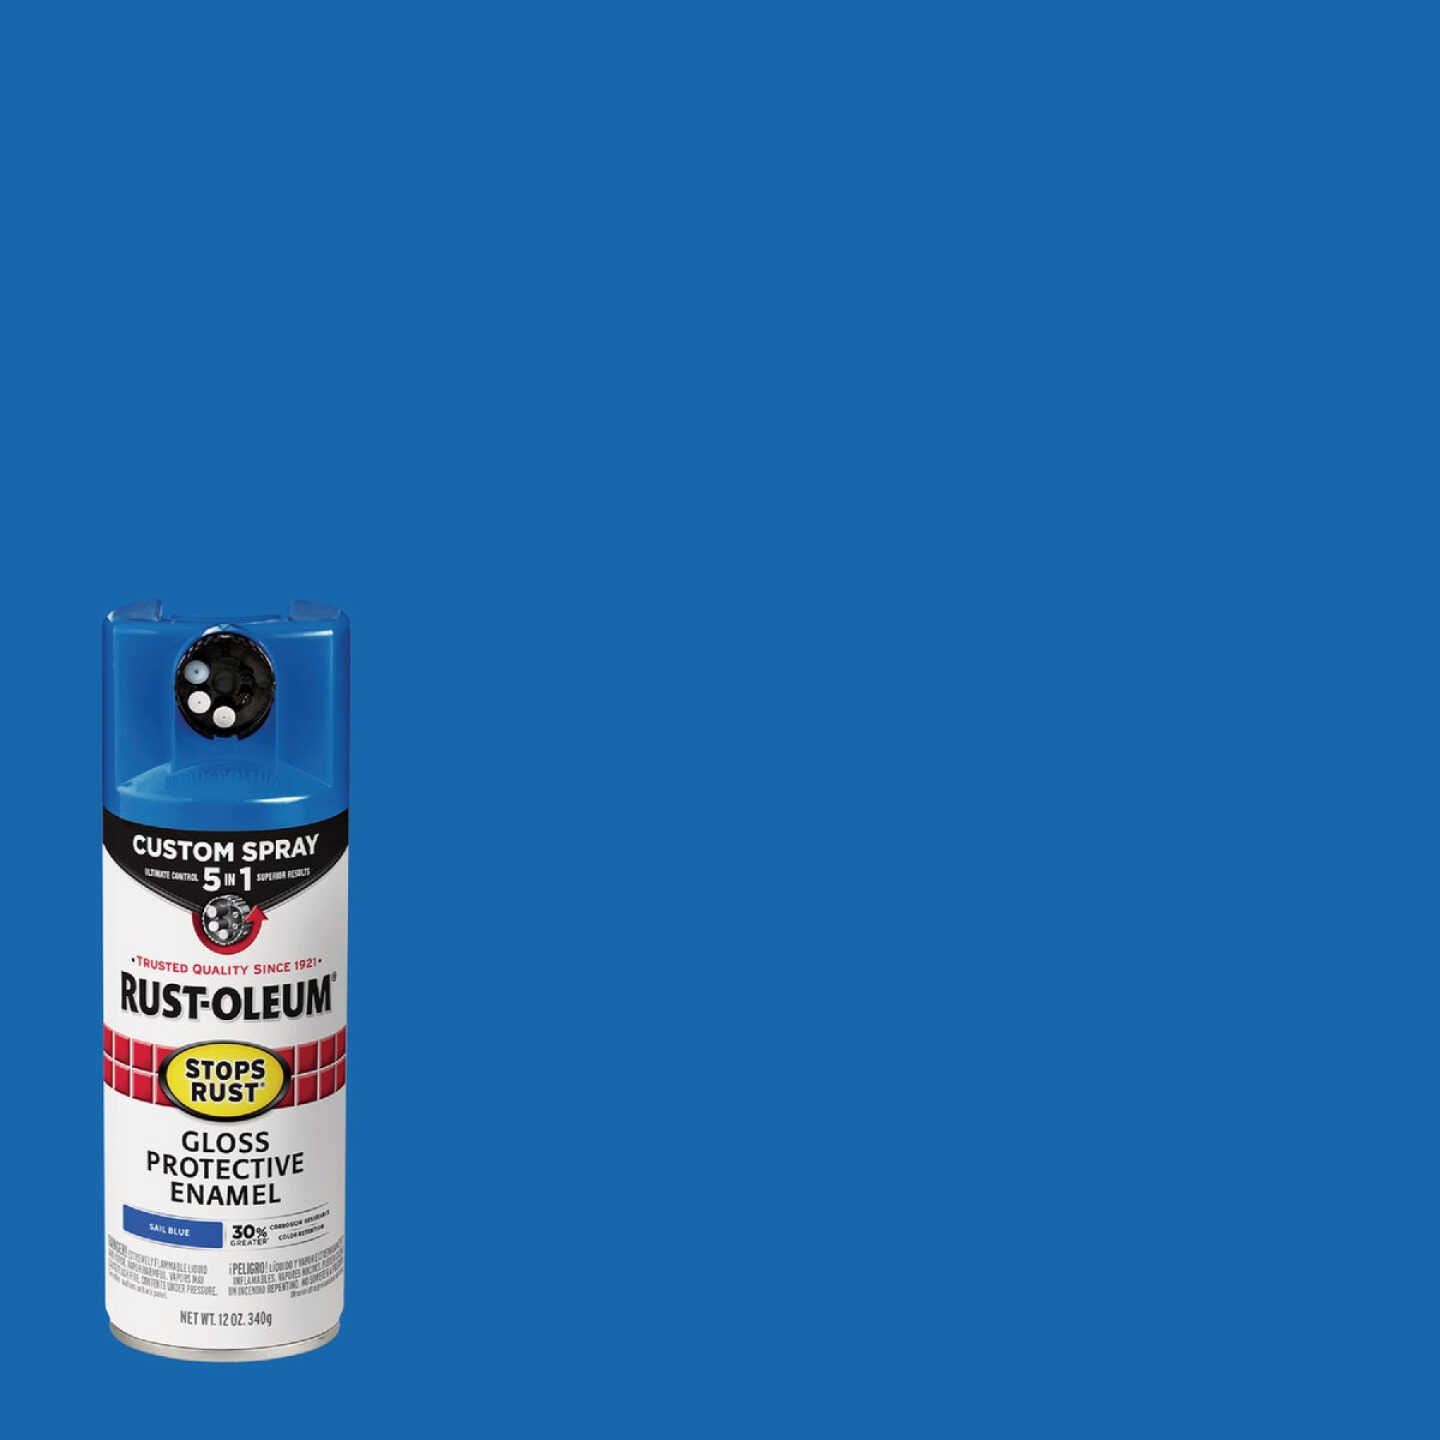 Rust-Oleum 12 oz Stops Rust Protective Enamel Spray Paint - Gloss Leather Brown